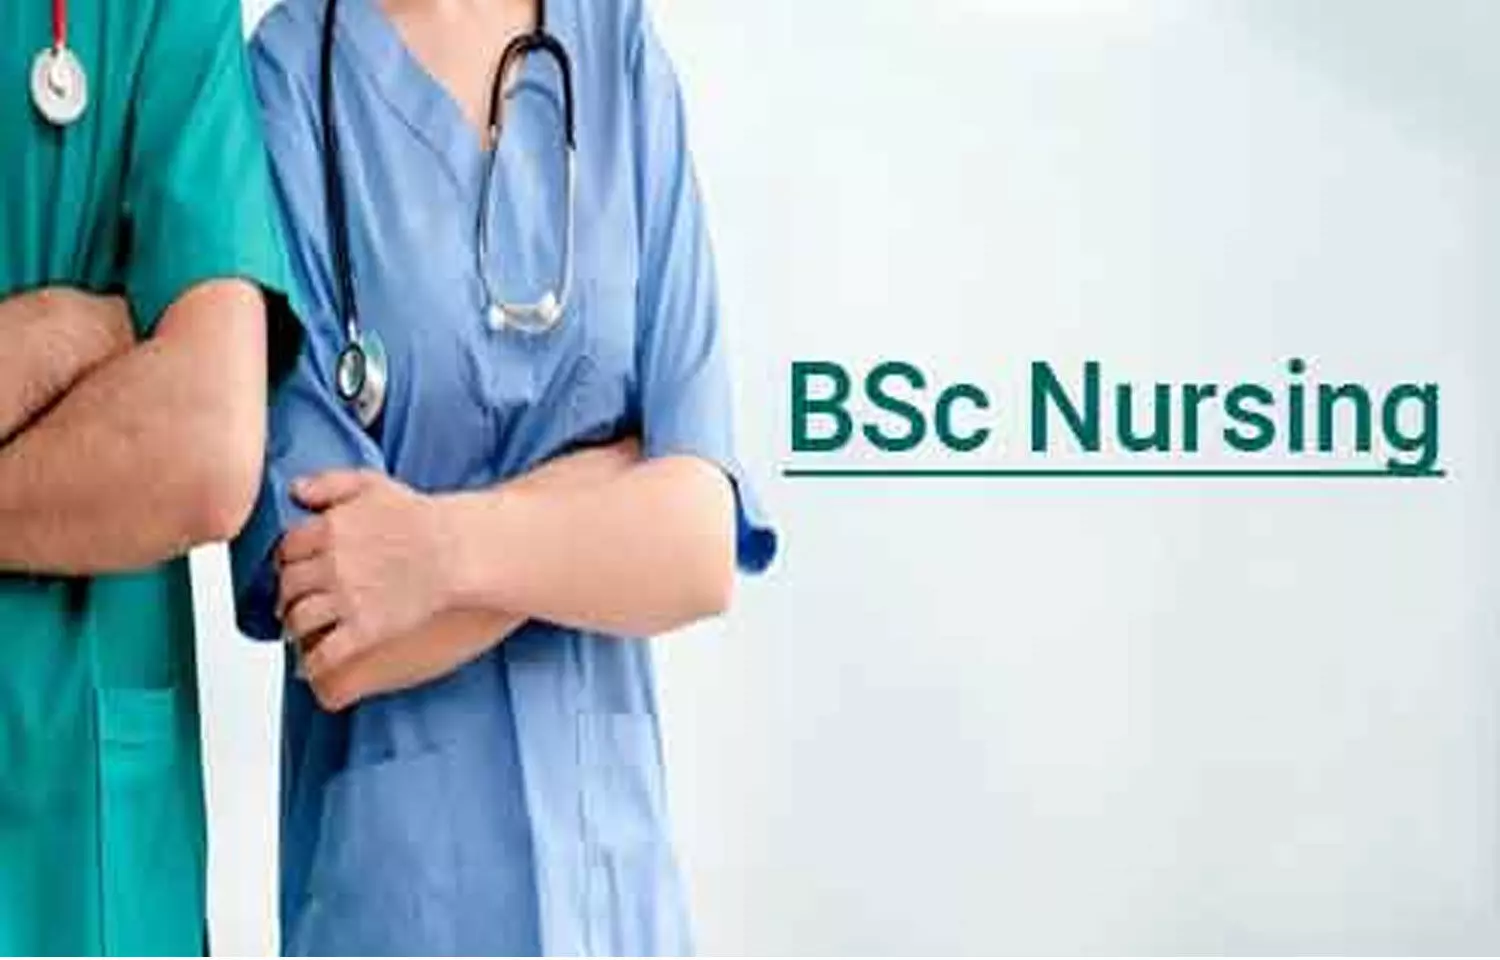 BSc Nursing at PGIMER: 12 seats available for Spot counselling